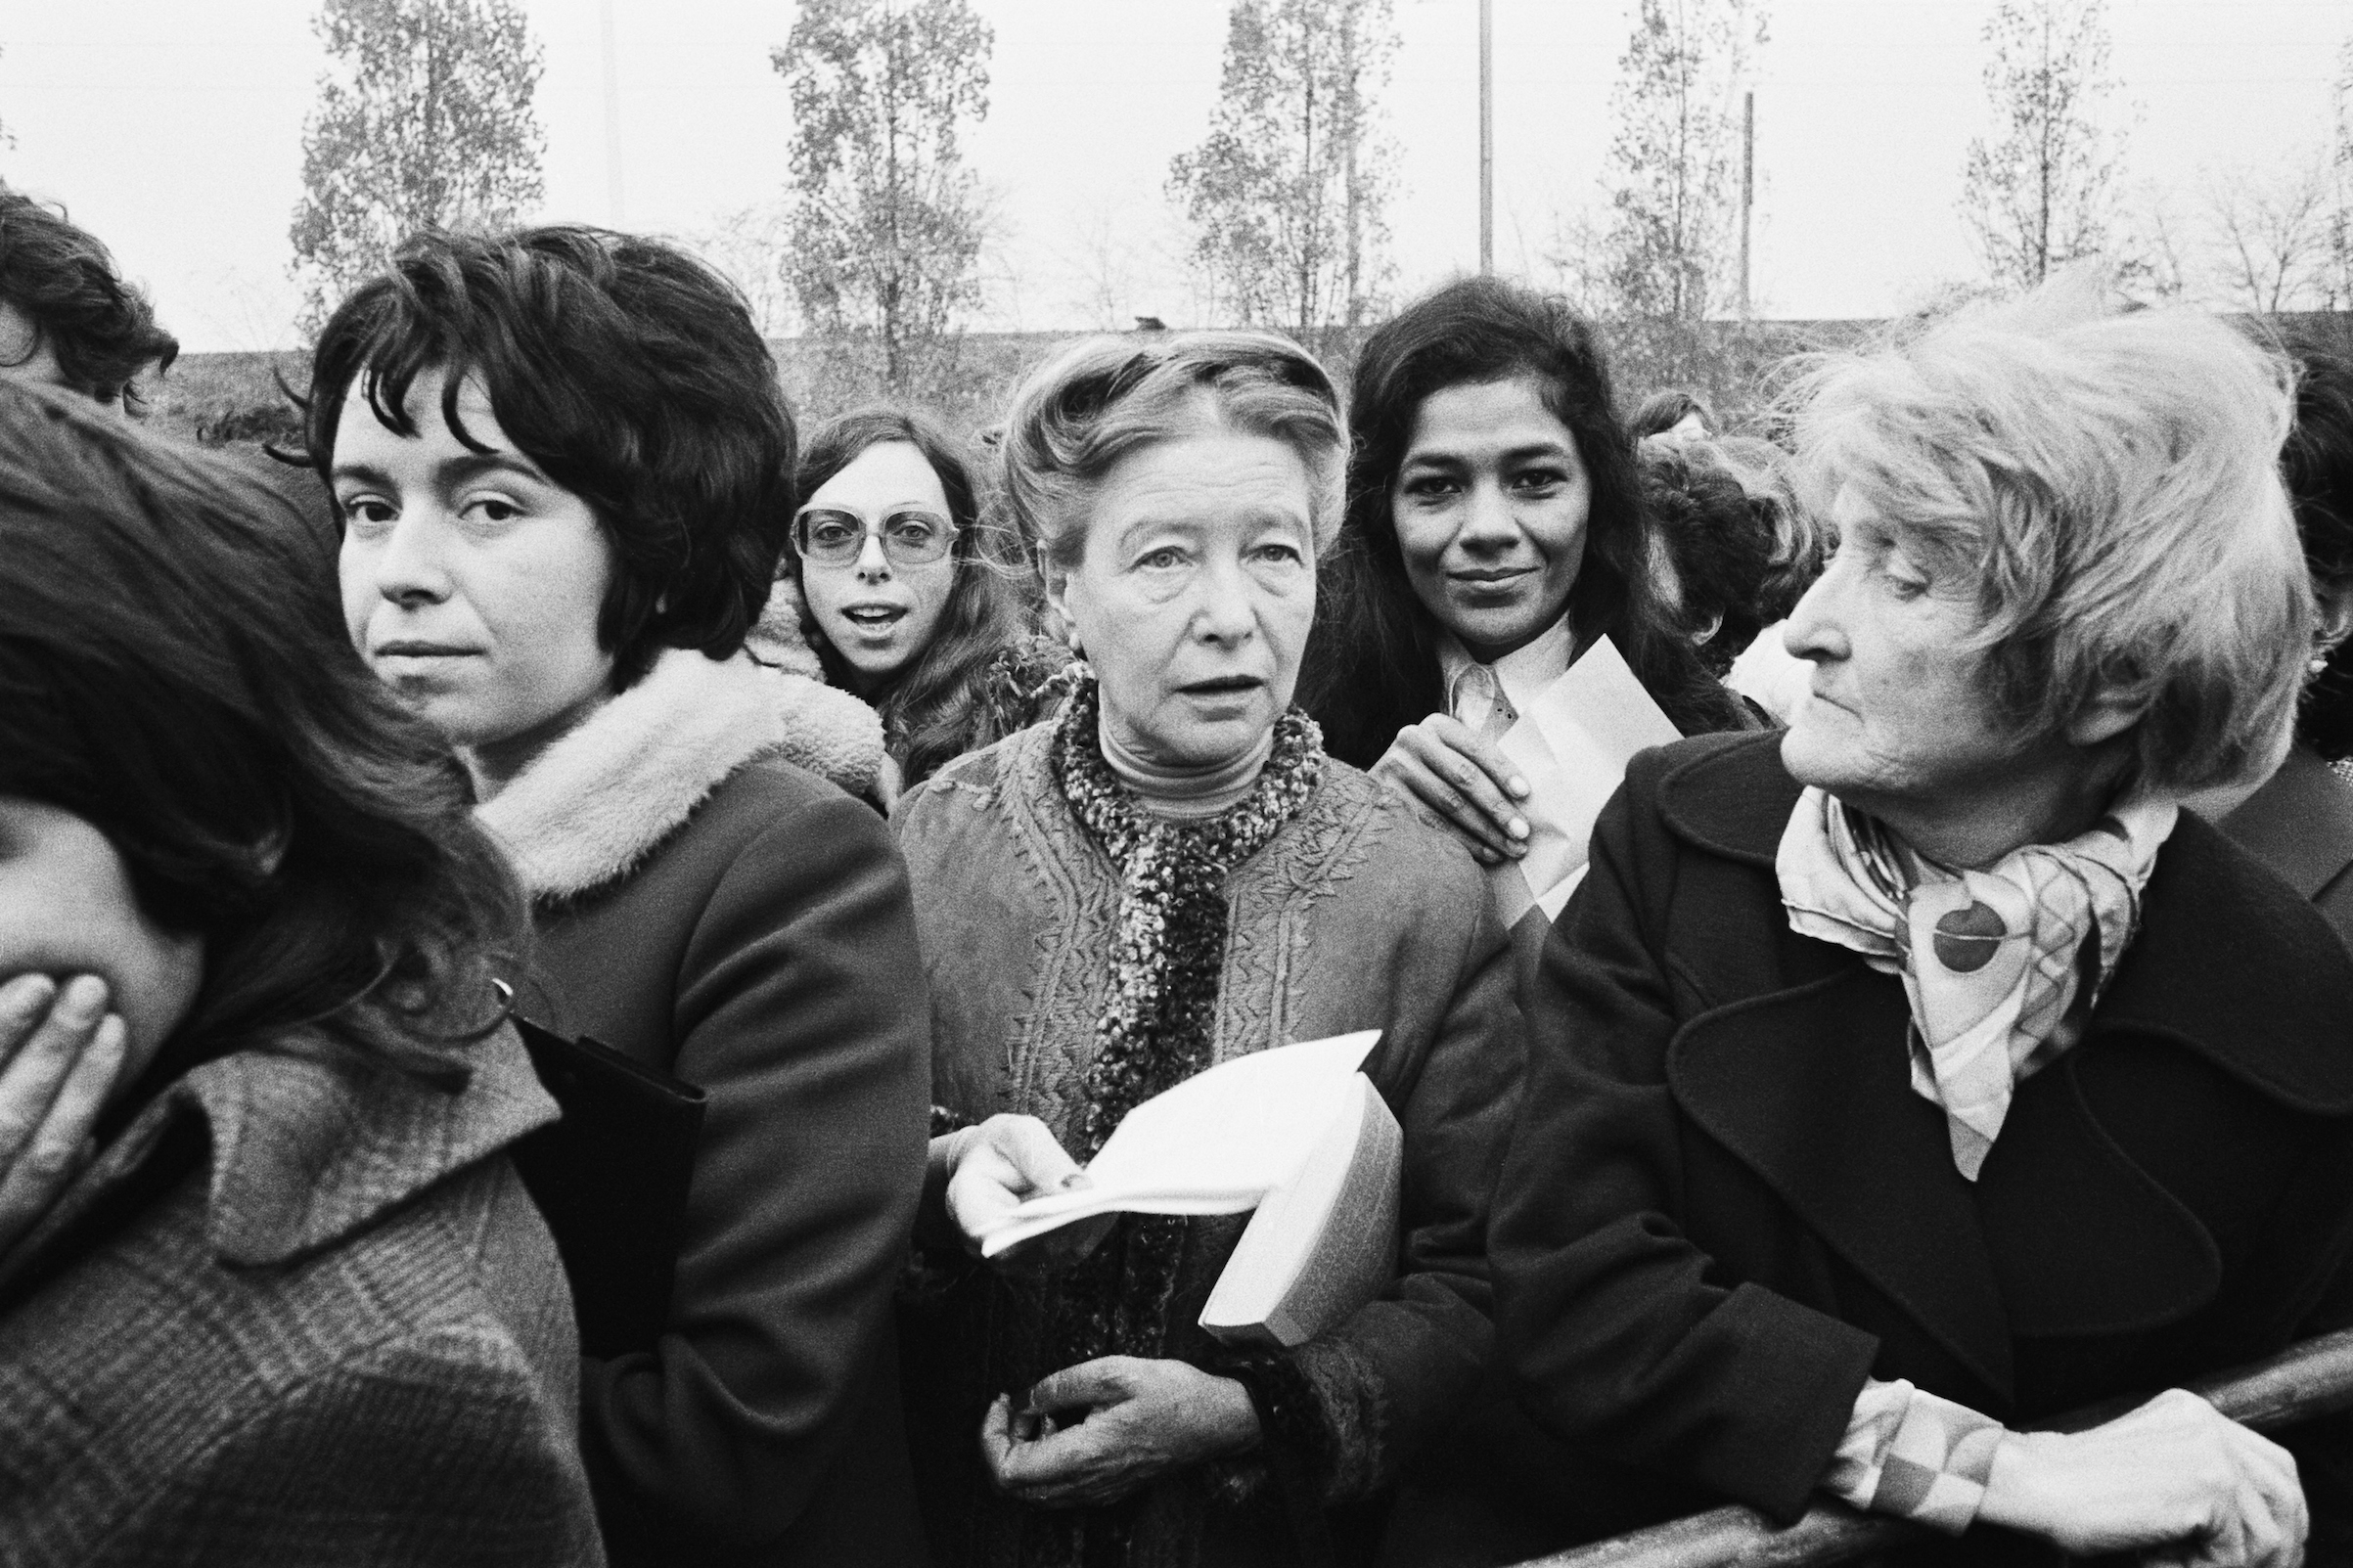 French writer, existentialist philosopher, political activist and feminist Simone de Beauvoir during the landmark Bobigny abortion trial in France in 1972. (Artault Erwan—Sygma / Getty Images)